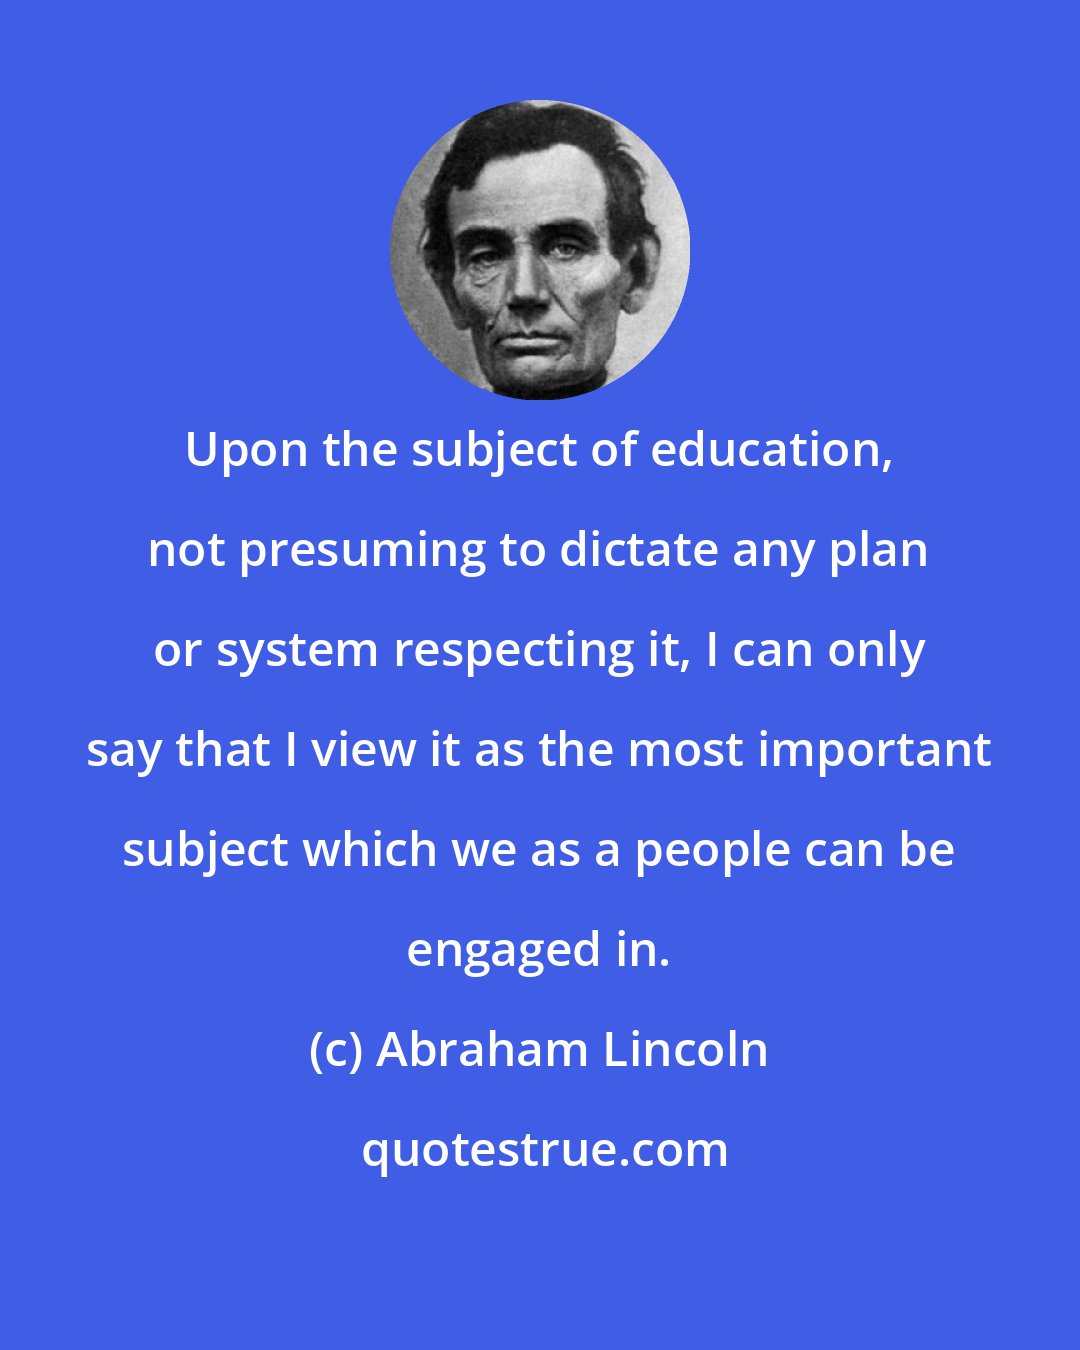 Abraham Lincoln: Upon the subject of education, not presuming to dictate any plan or system respecting it, I can only say that I view it as the most important subject which we as a people can be engaged in.